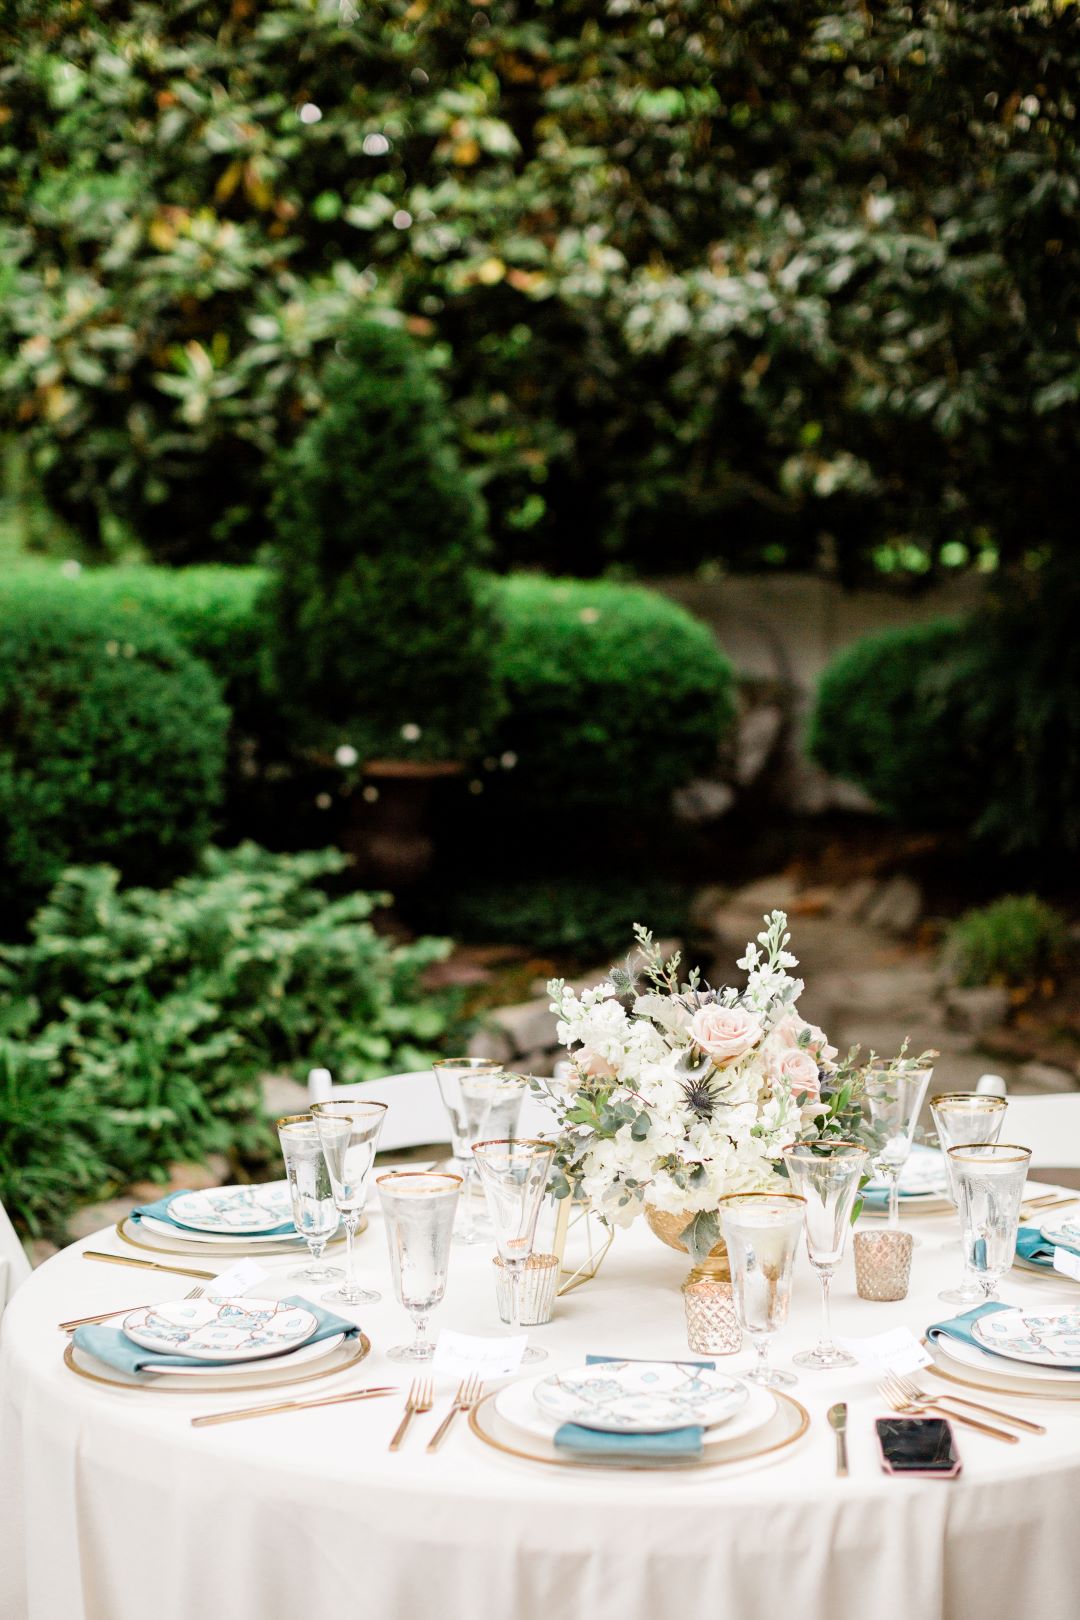 CJ's Off The Square | Stunning table settings in the garden surrounded by lush green trees and shrubs